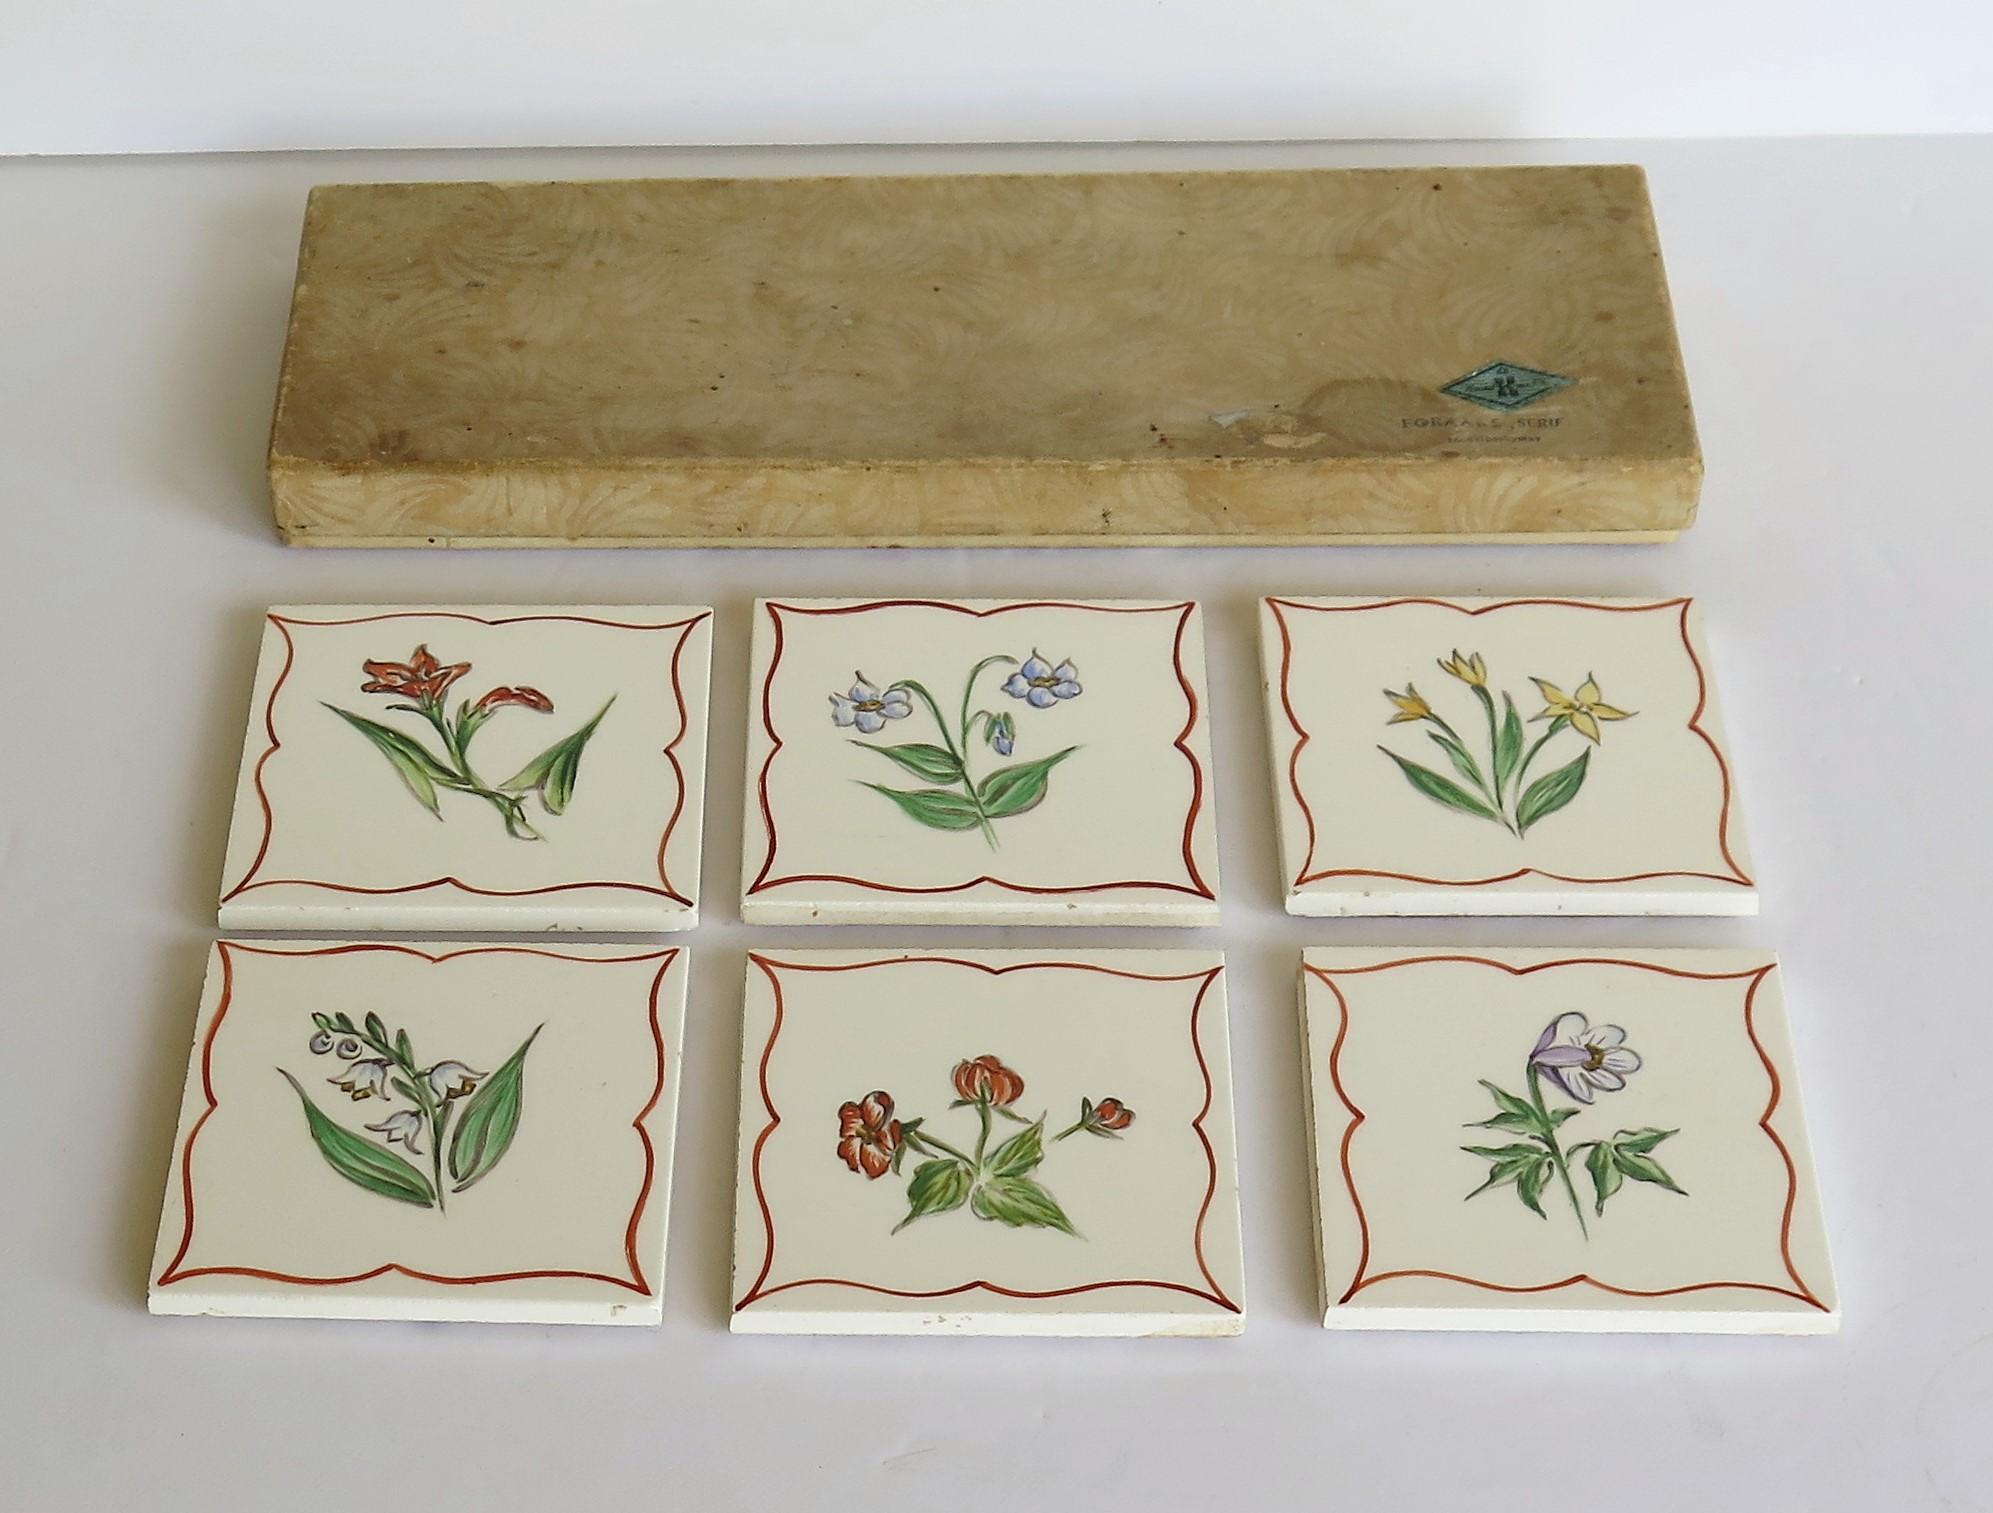 Set of Six Hand Painted Flowers Coasters / Tiles in Original Box, Denmark 1940s 1